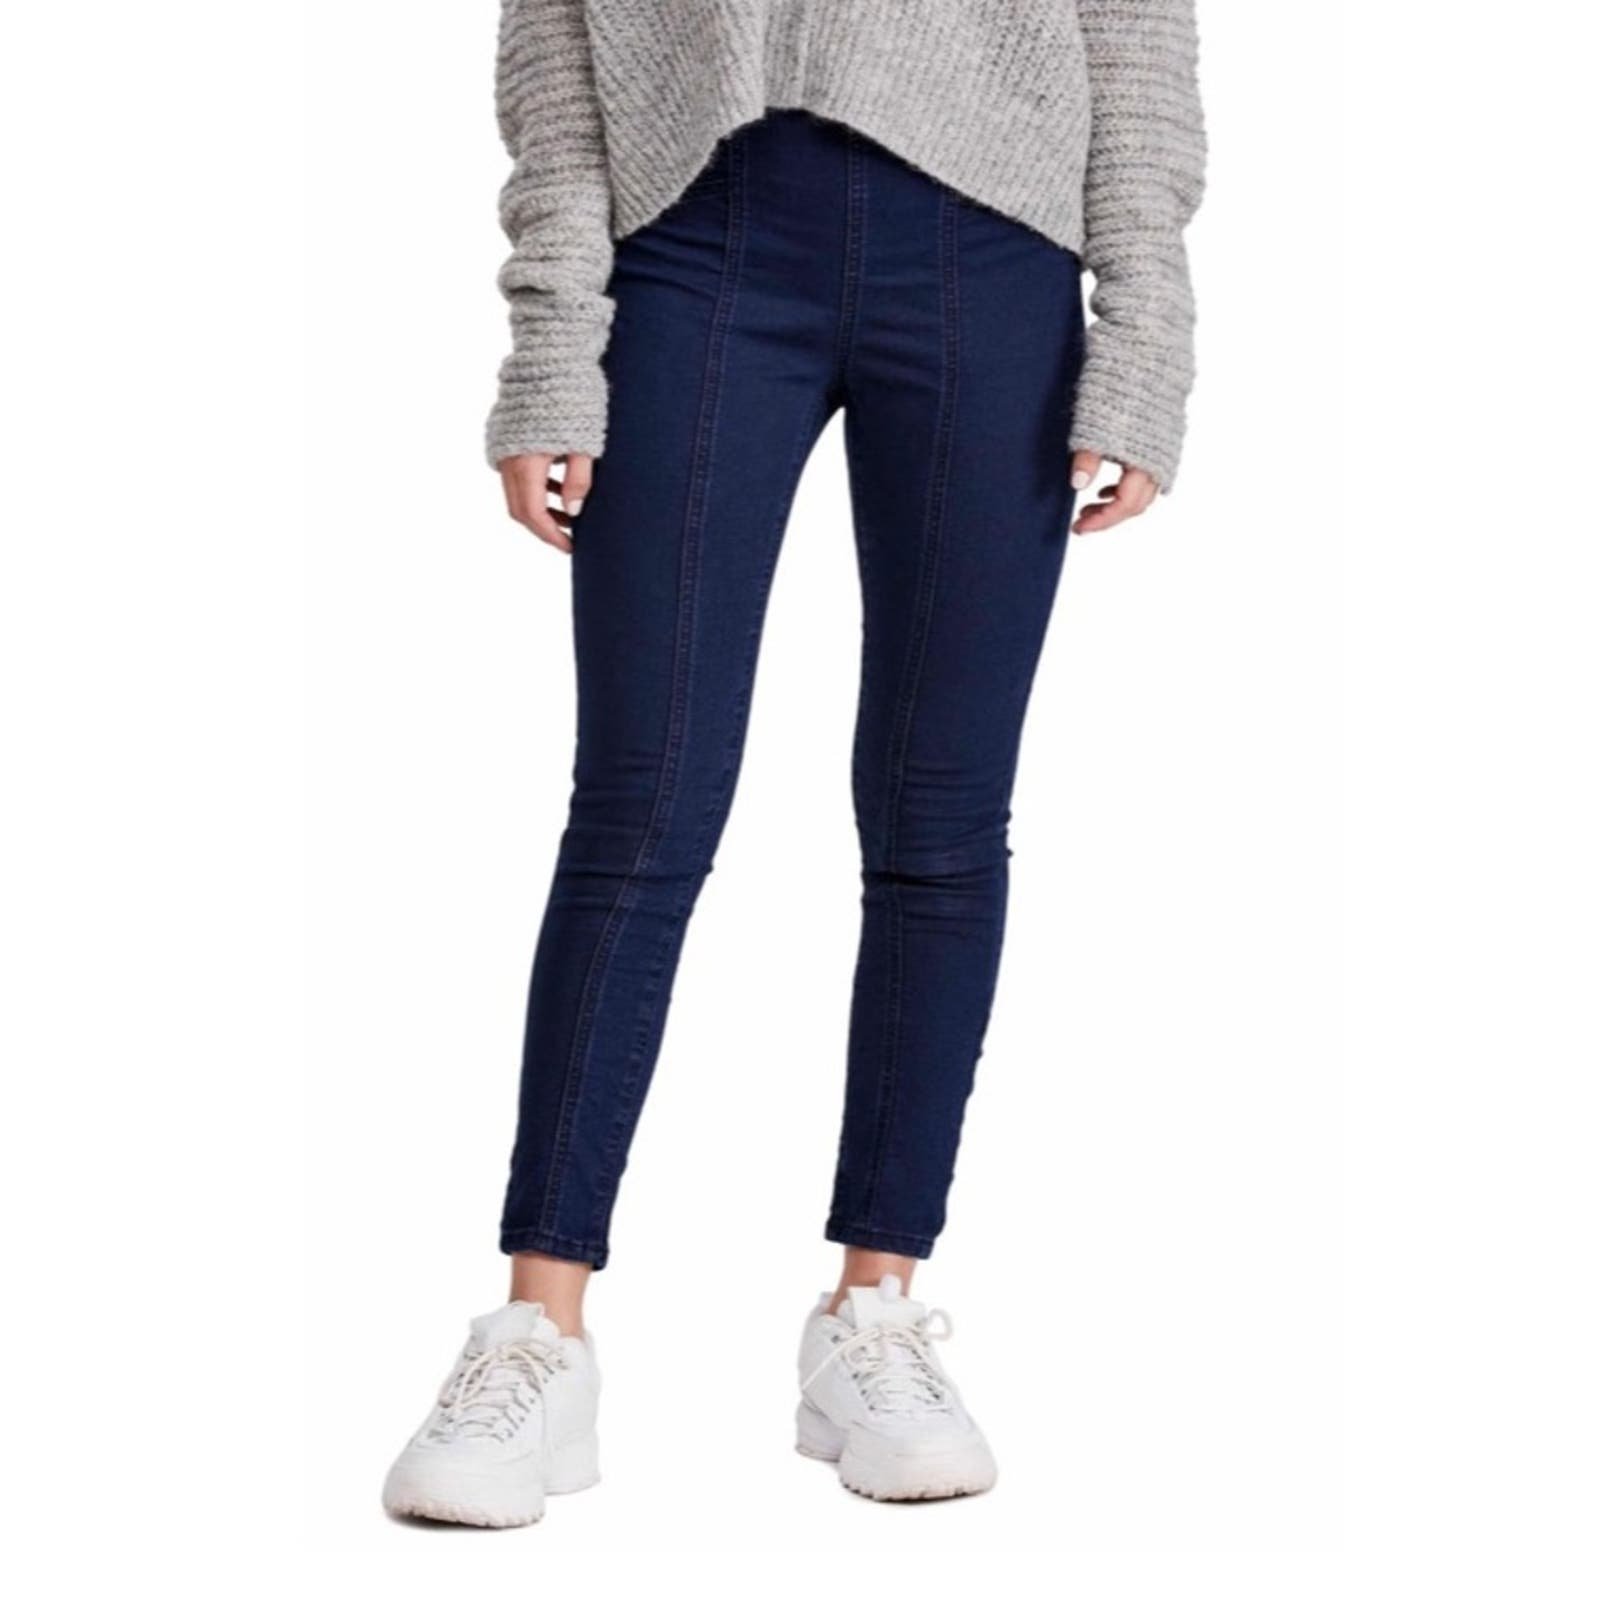 Discounted Free People Feel Alright Skinny Jeans n7BFt6